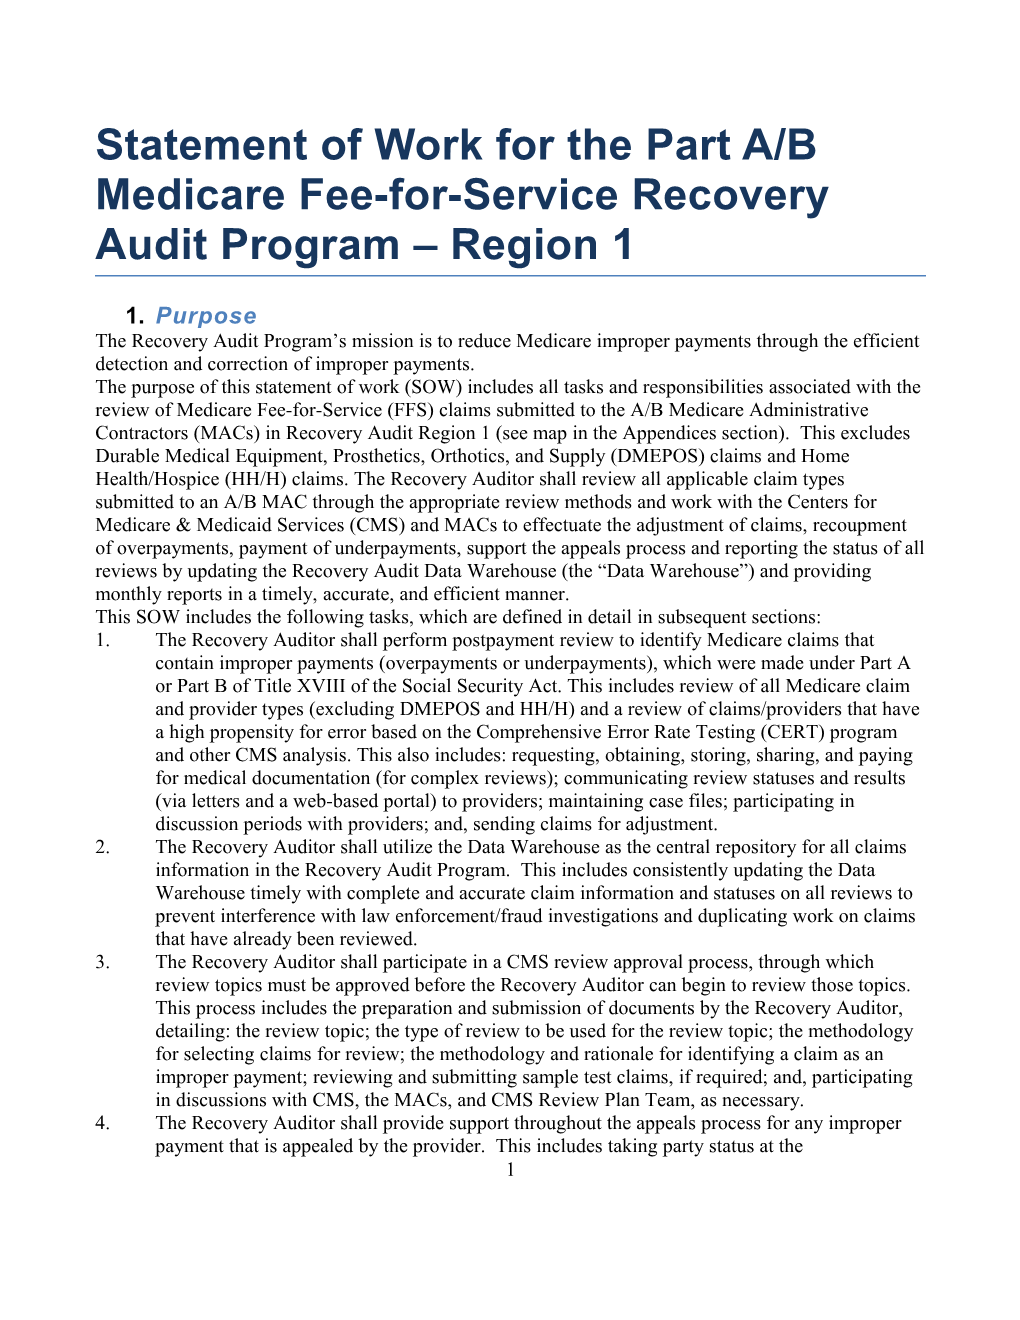 Statement of Work for the Part A/B Medicare Fee-For-Service Recovery Audit Program Region 1